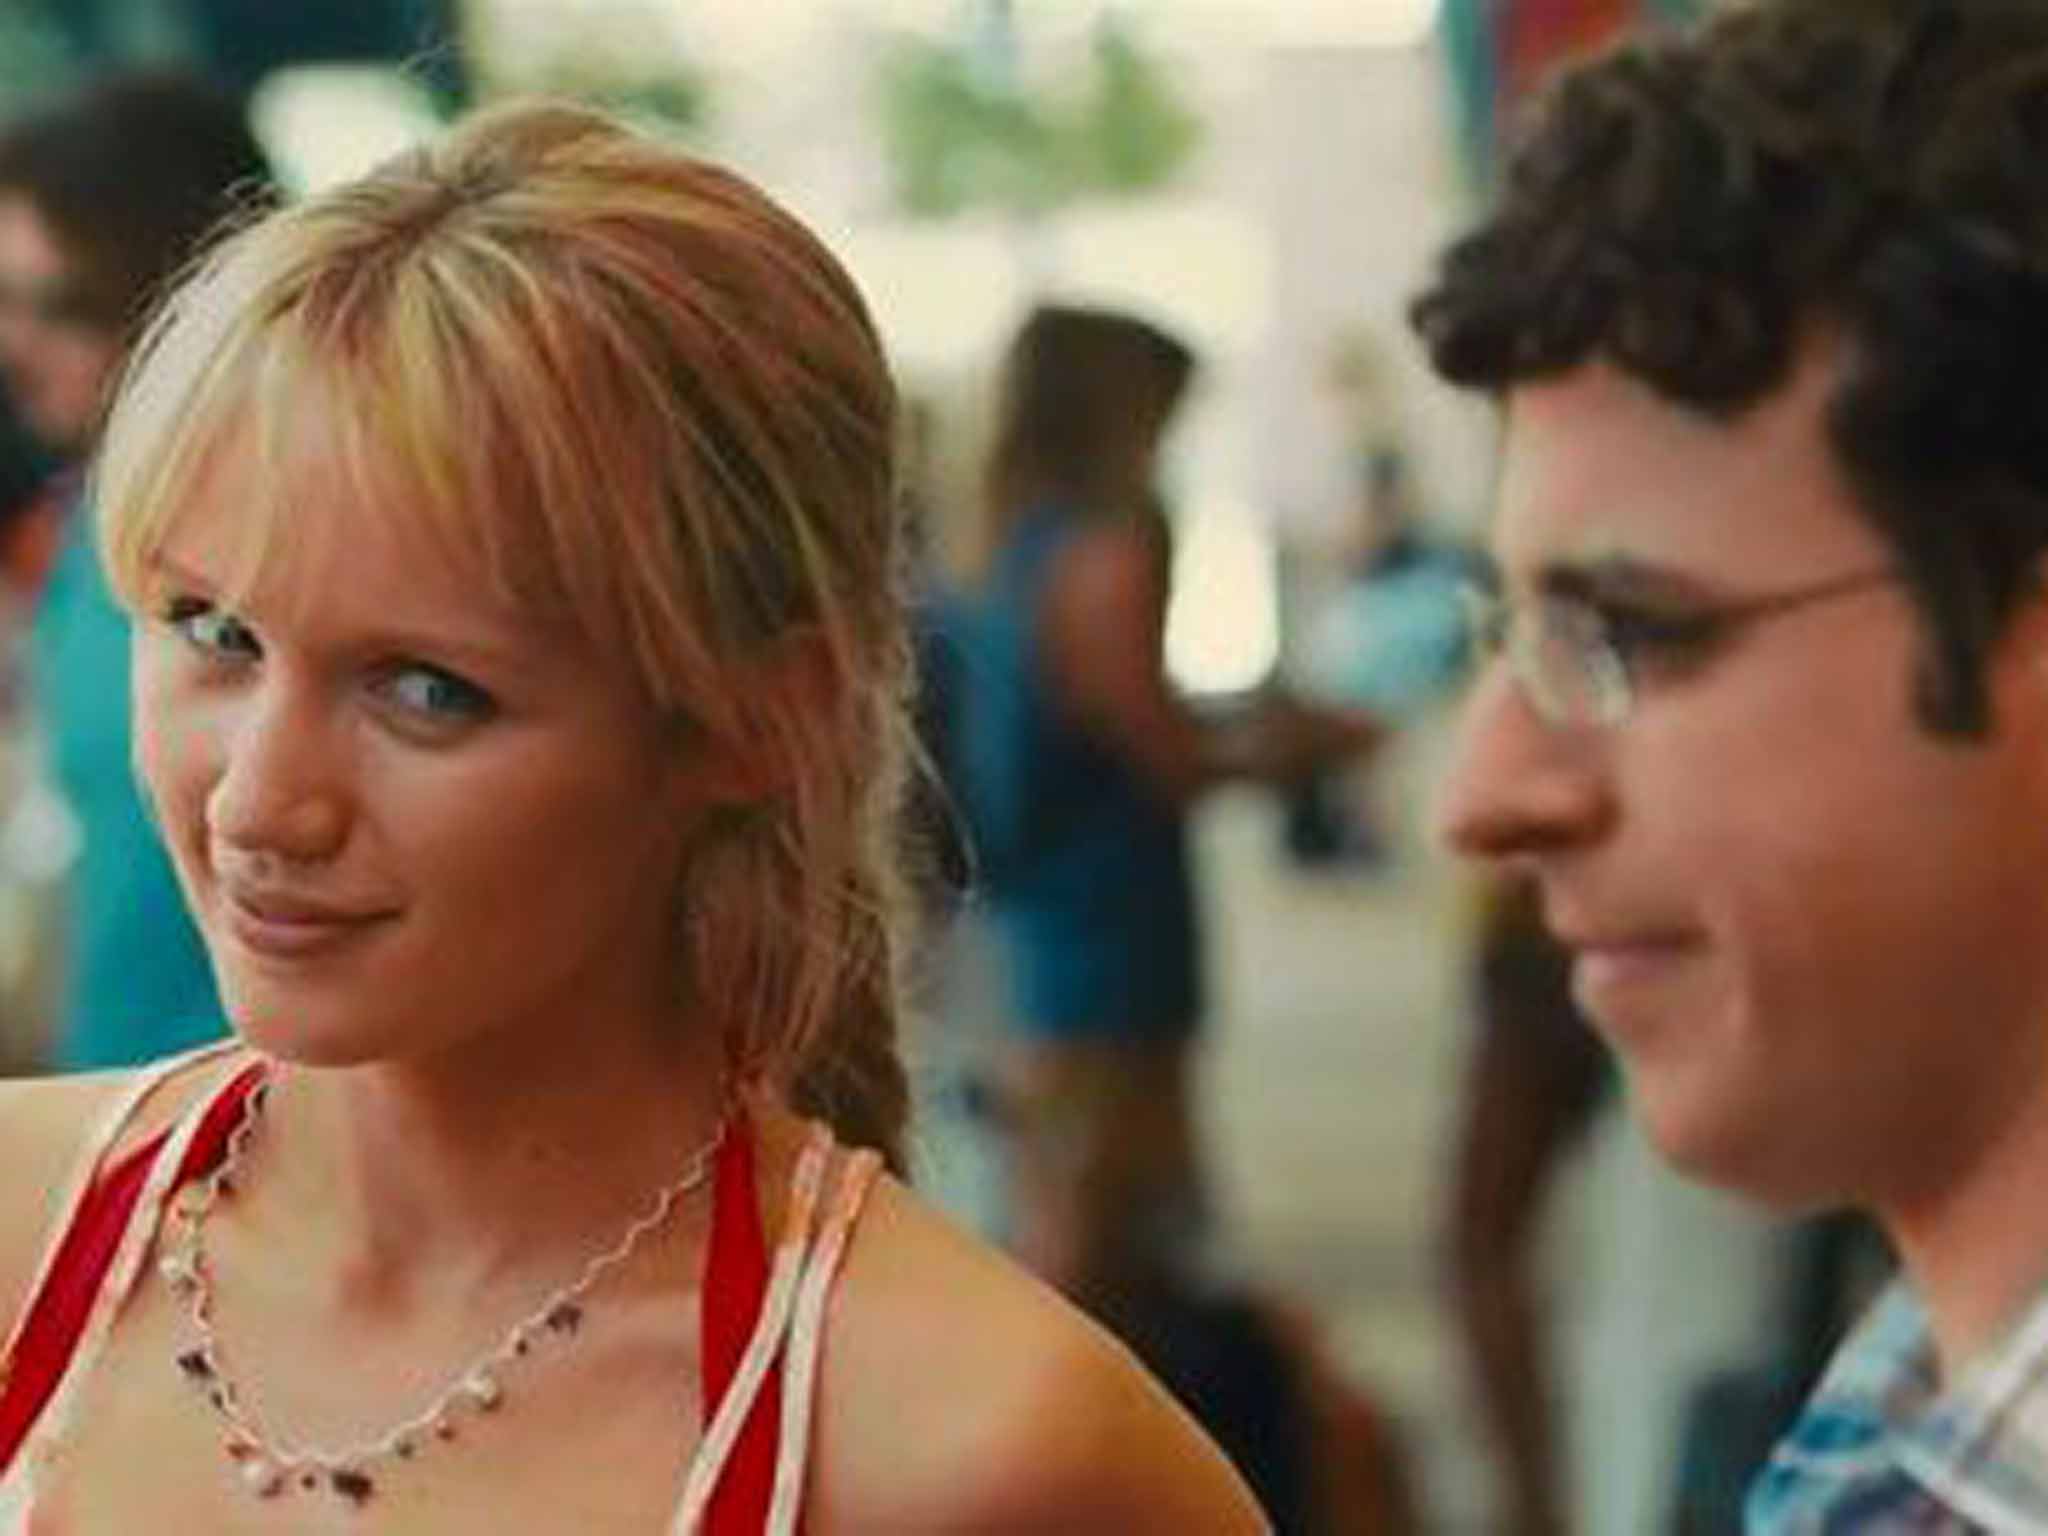 The woman in white: Emily Berrington with Simon Bird in 'The Inbetweeners 2'